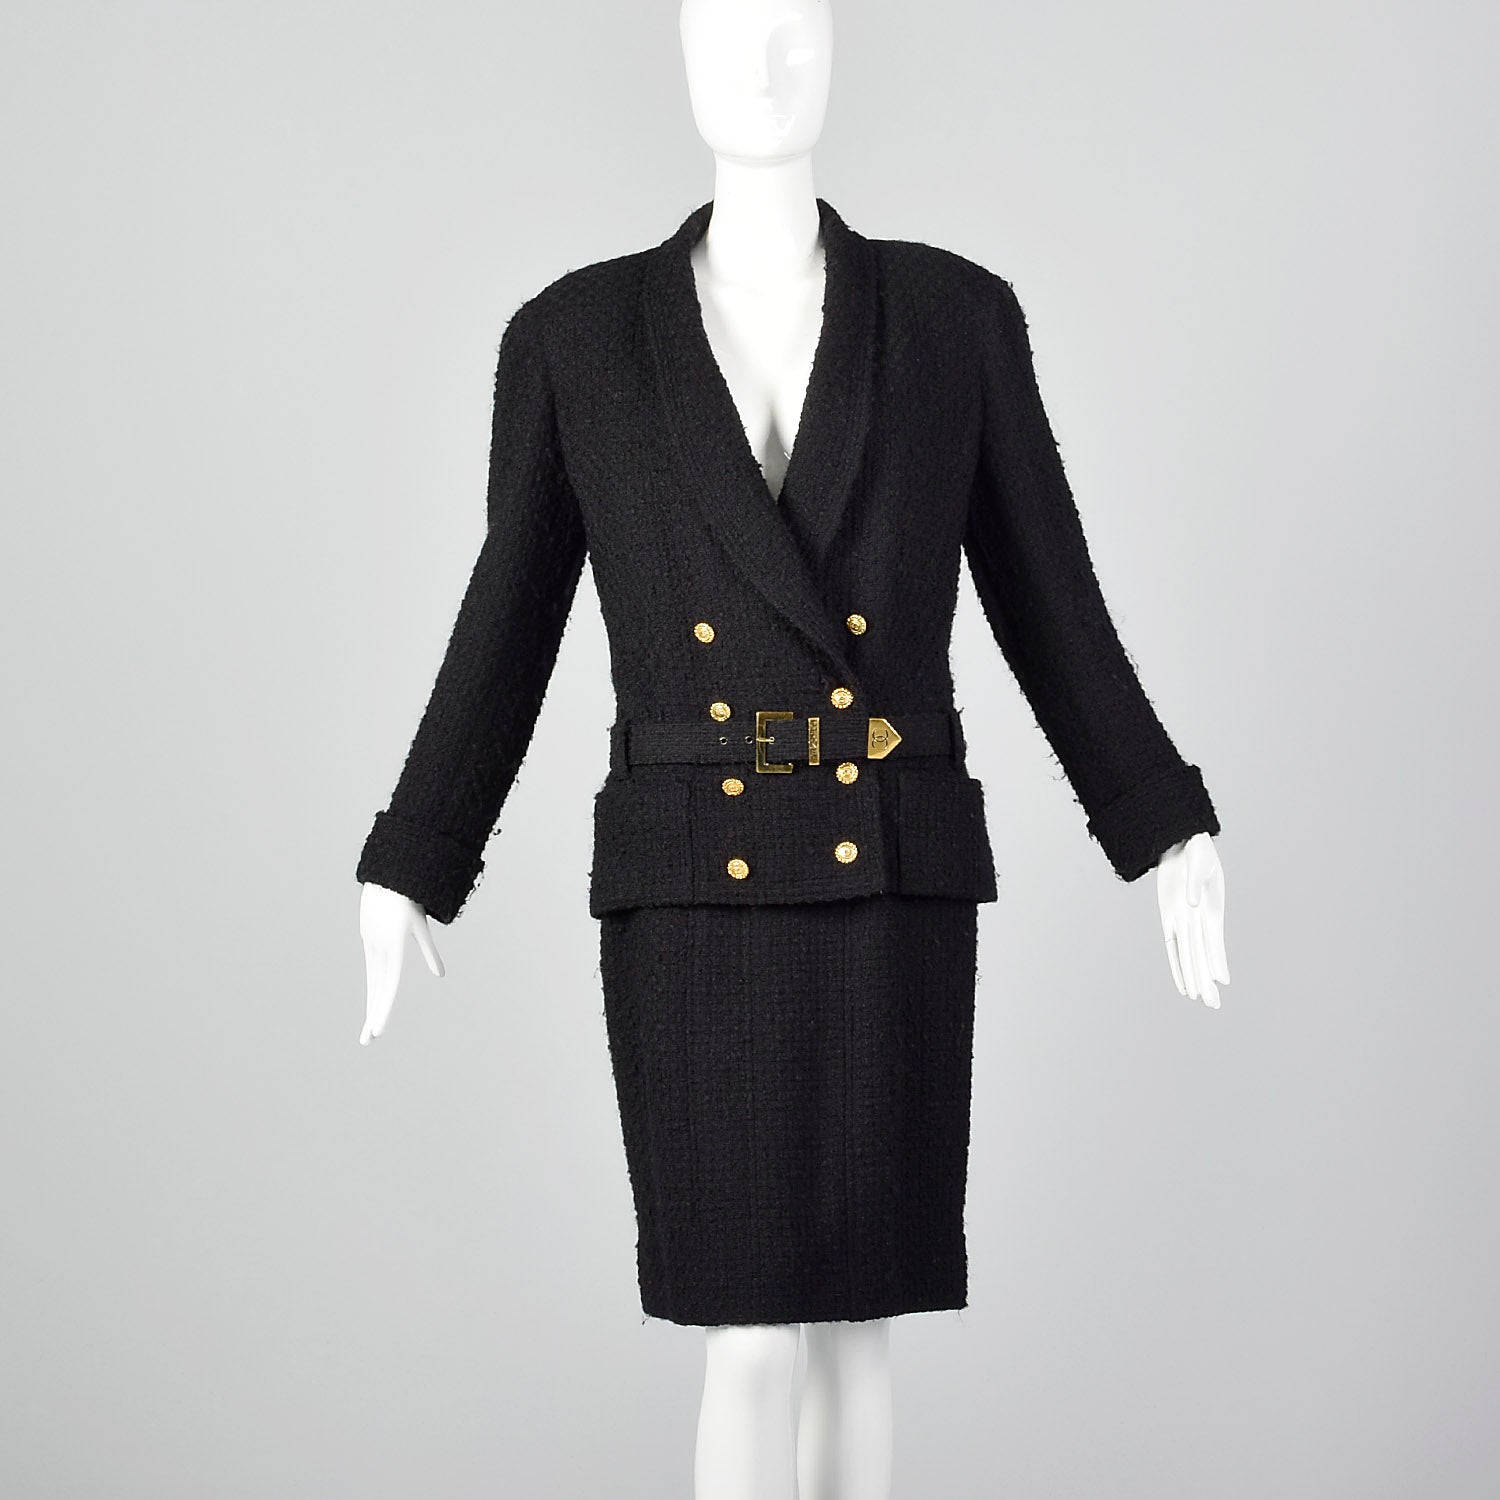 CHANEL Boutique 1990s Classic Black Wool Bouclé Jacket and Skirt